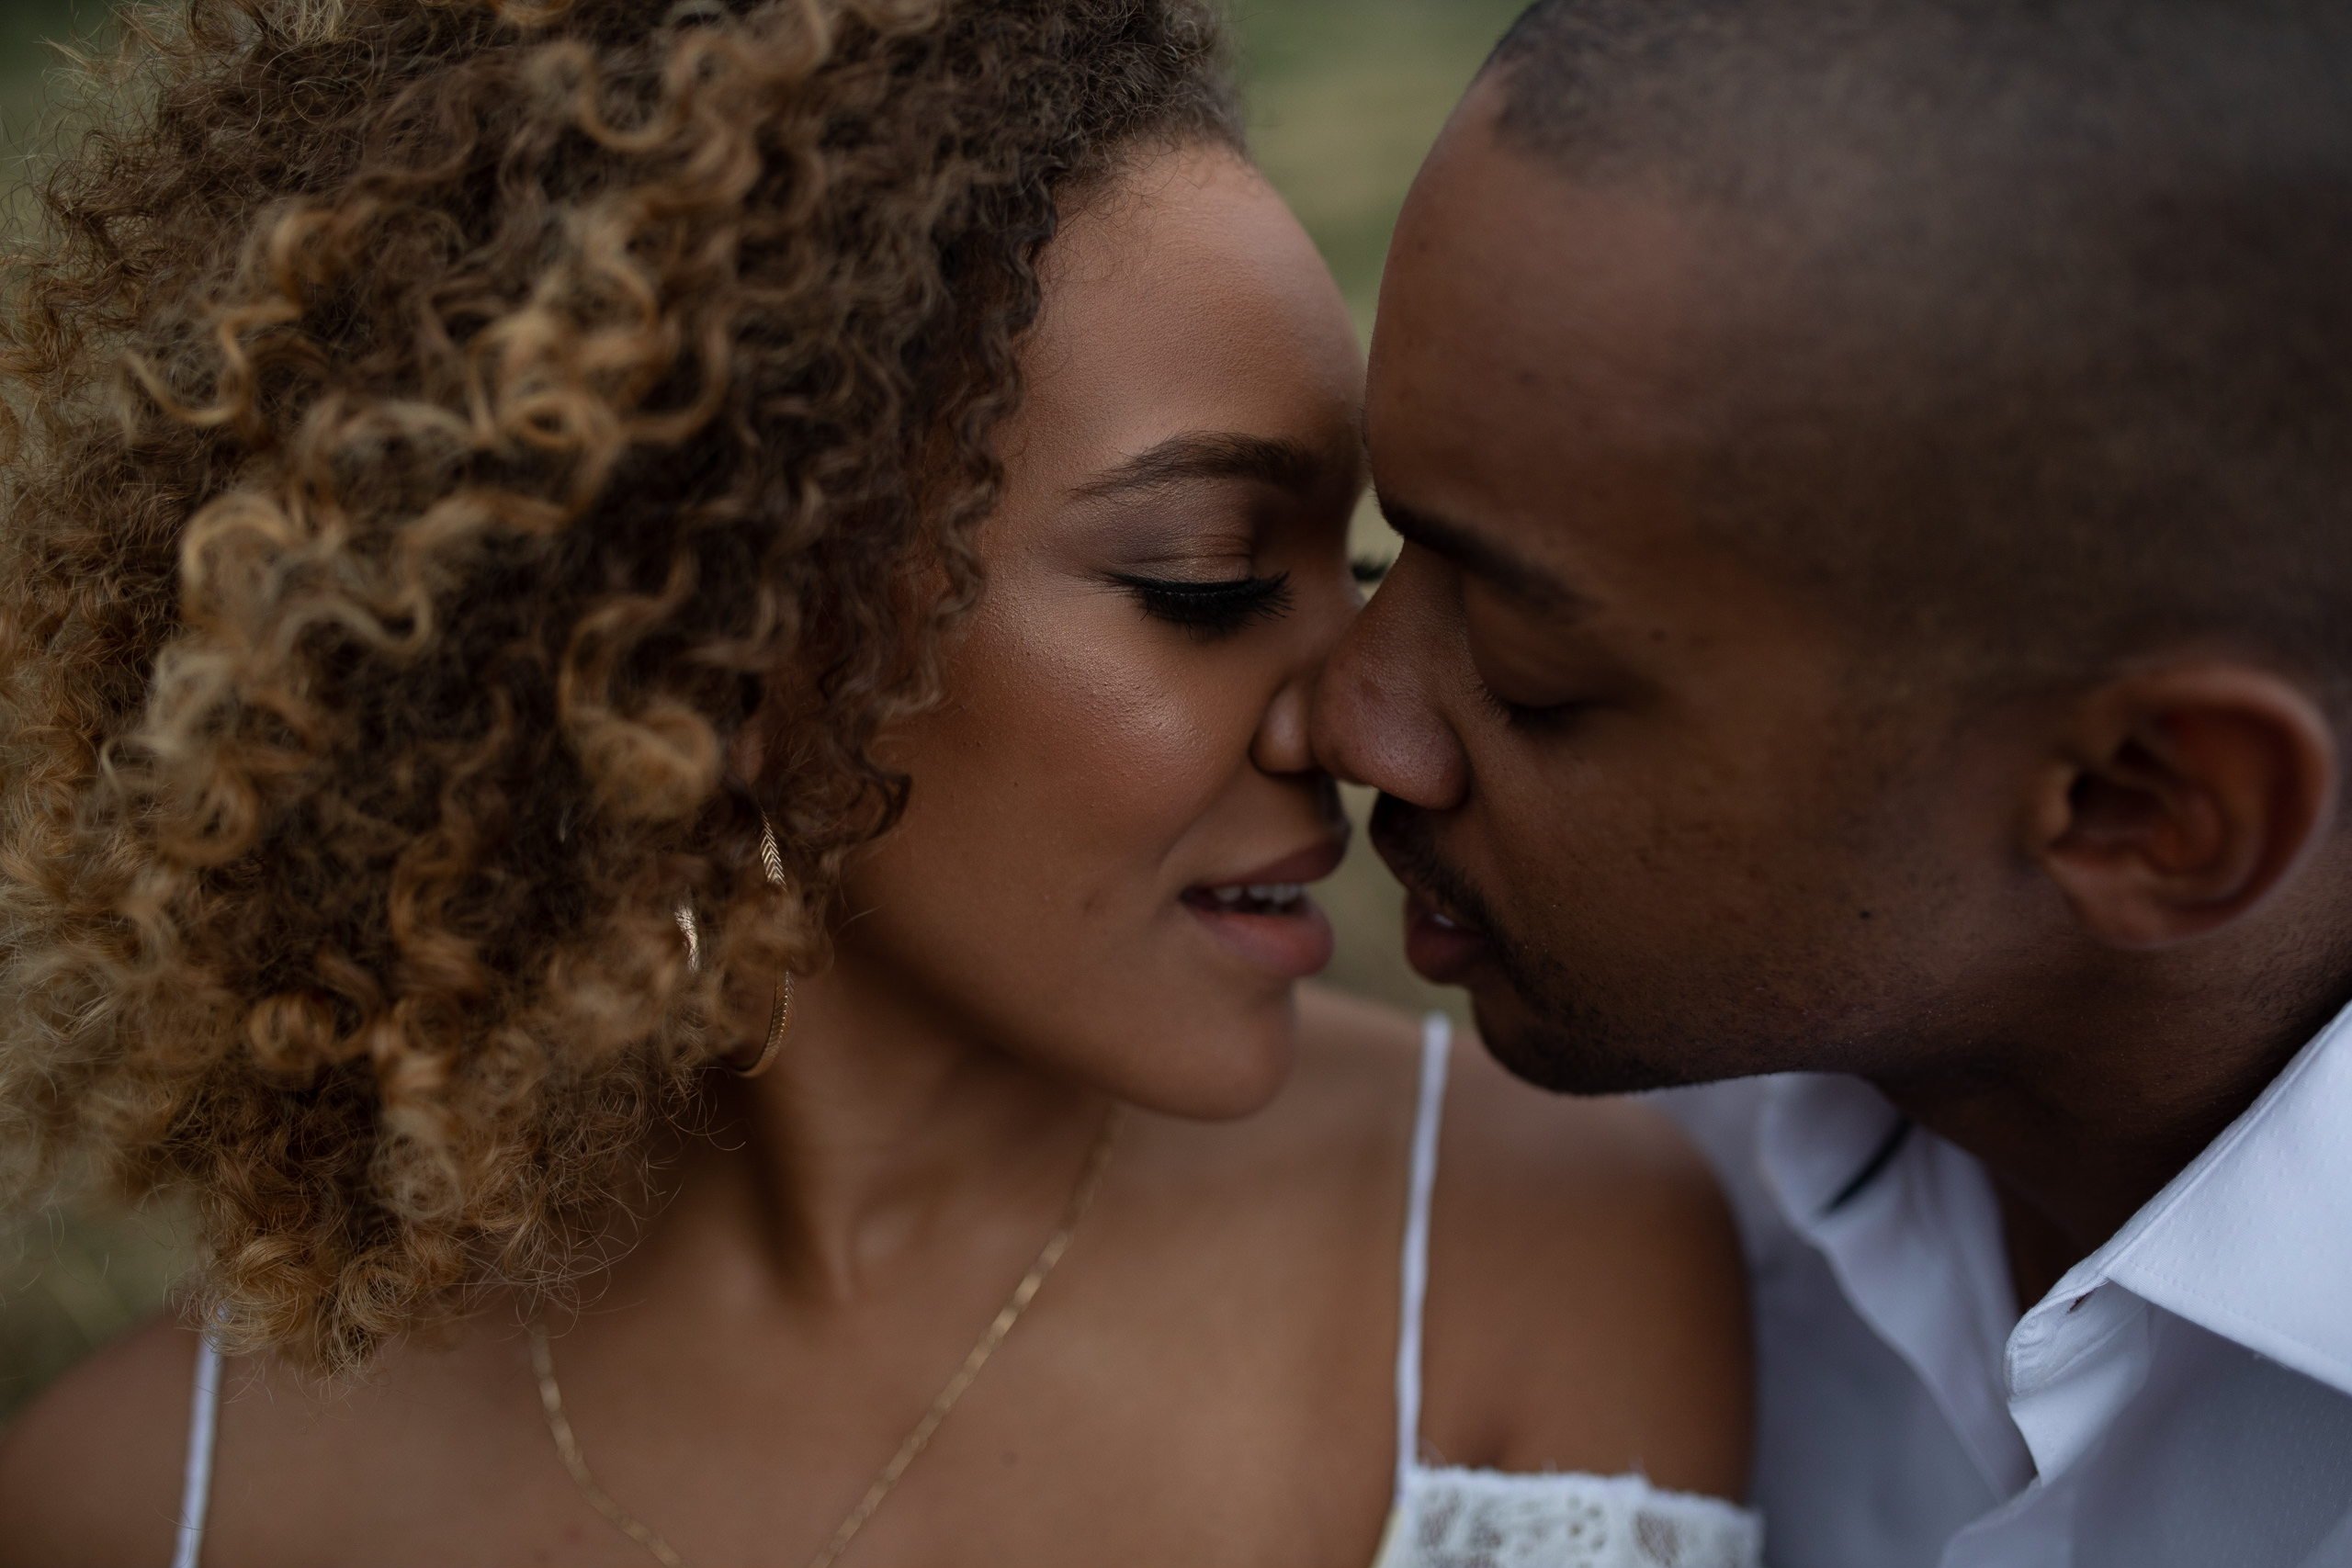 Romantic black couple with curly hair leaning in for a kiss on wedding day intimate moment bride and groom